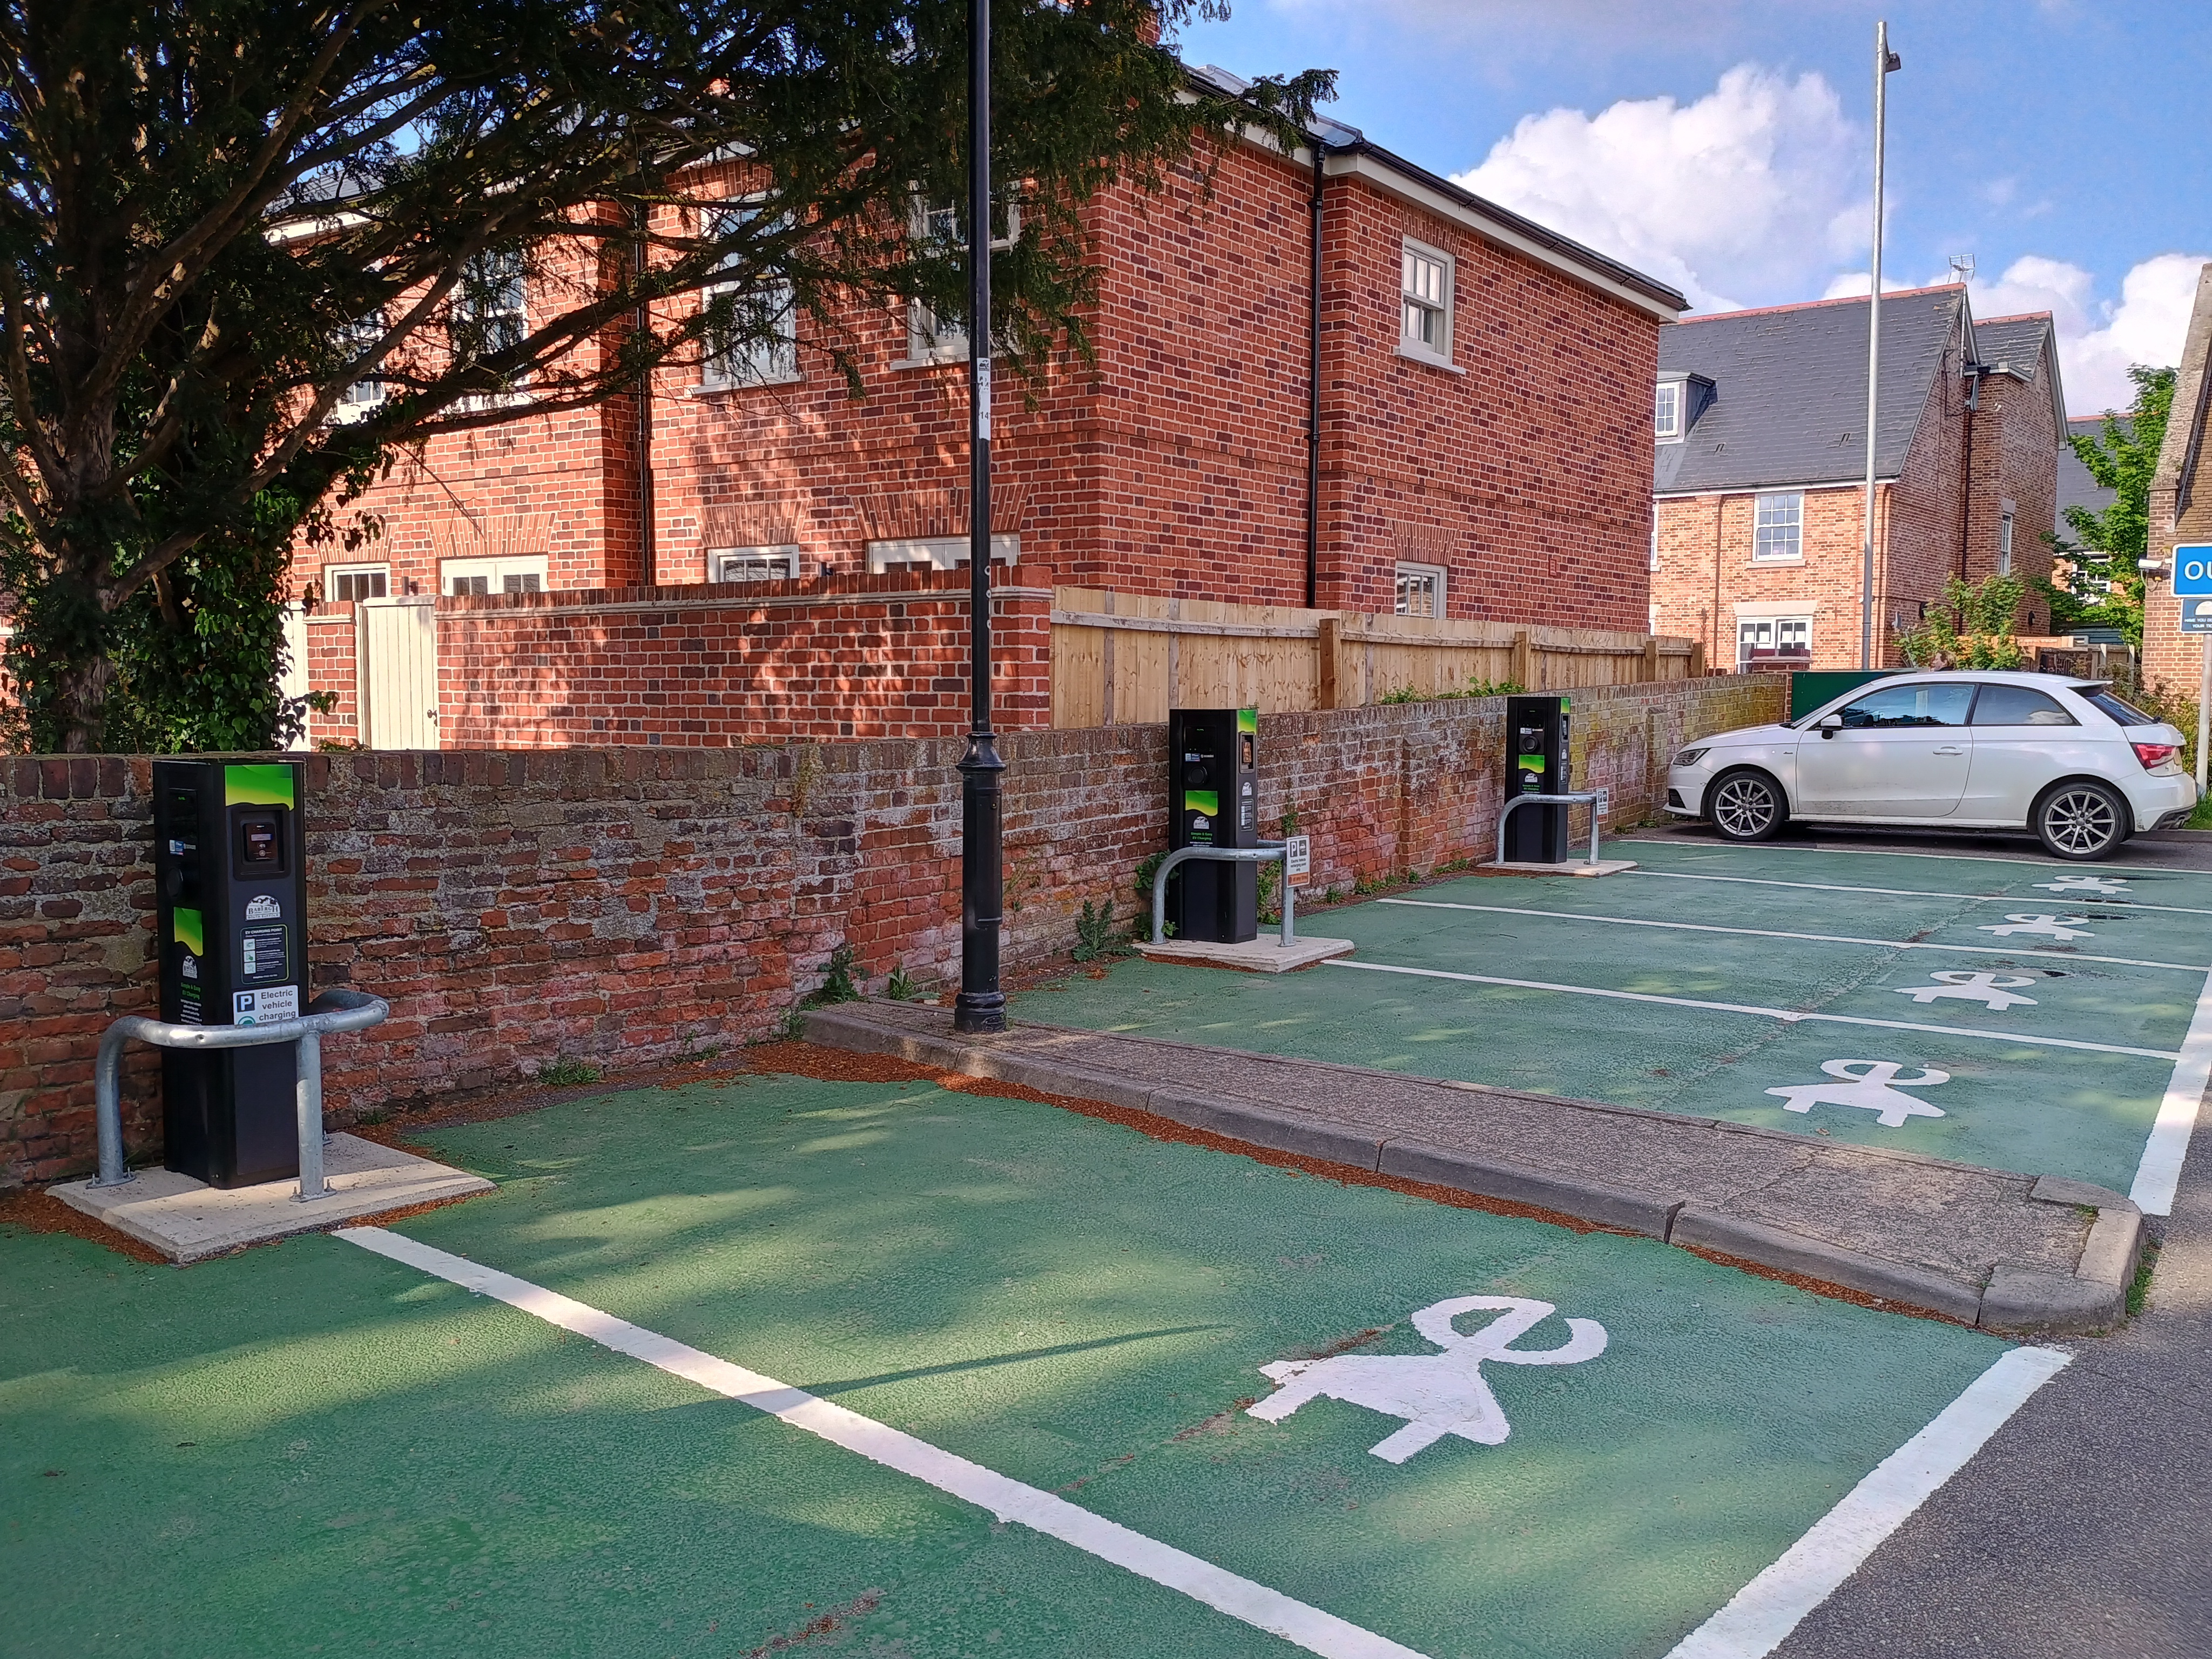 Some of the 47 new OZEV-funded EV chargepoints in Babergh and Mid Suffolk